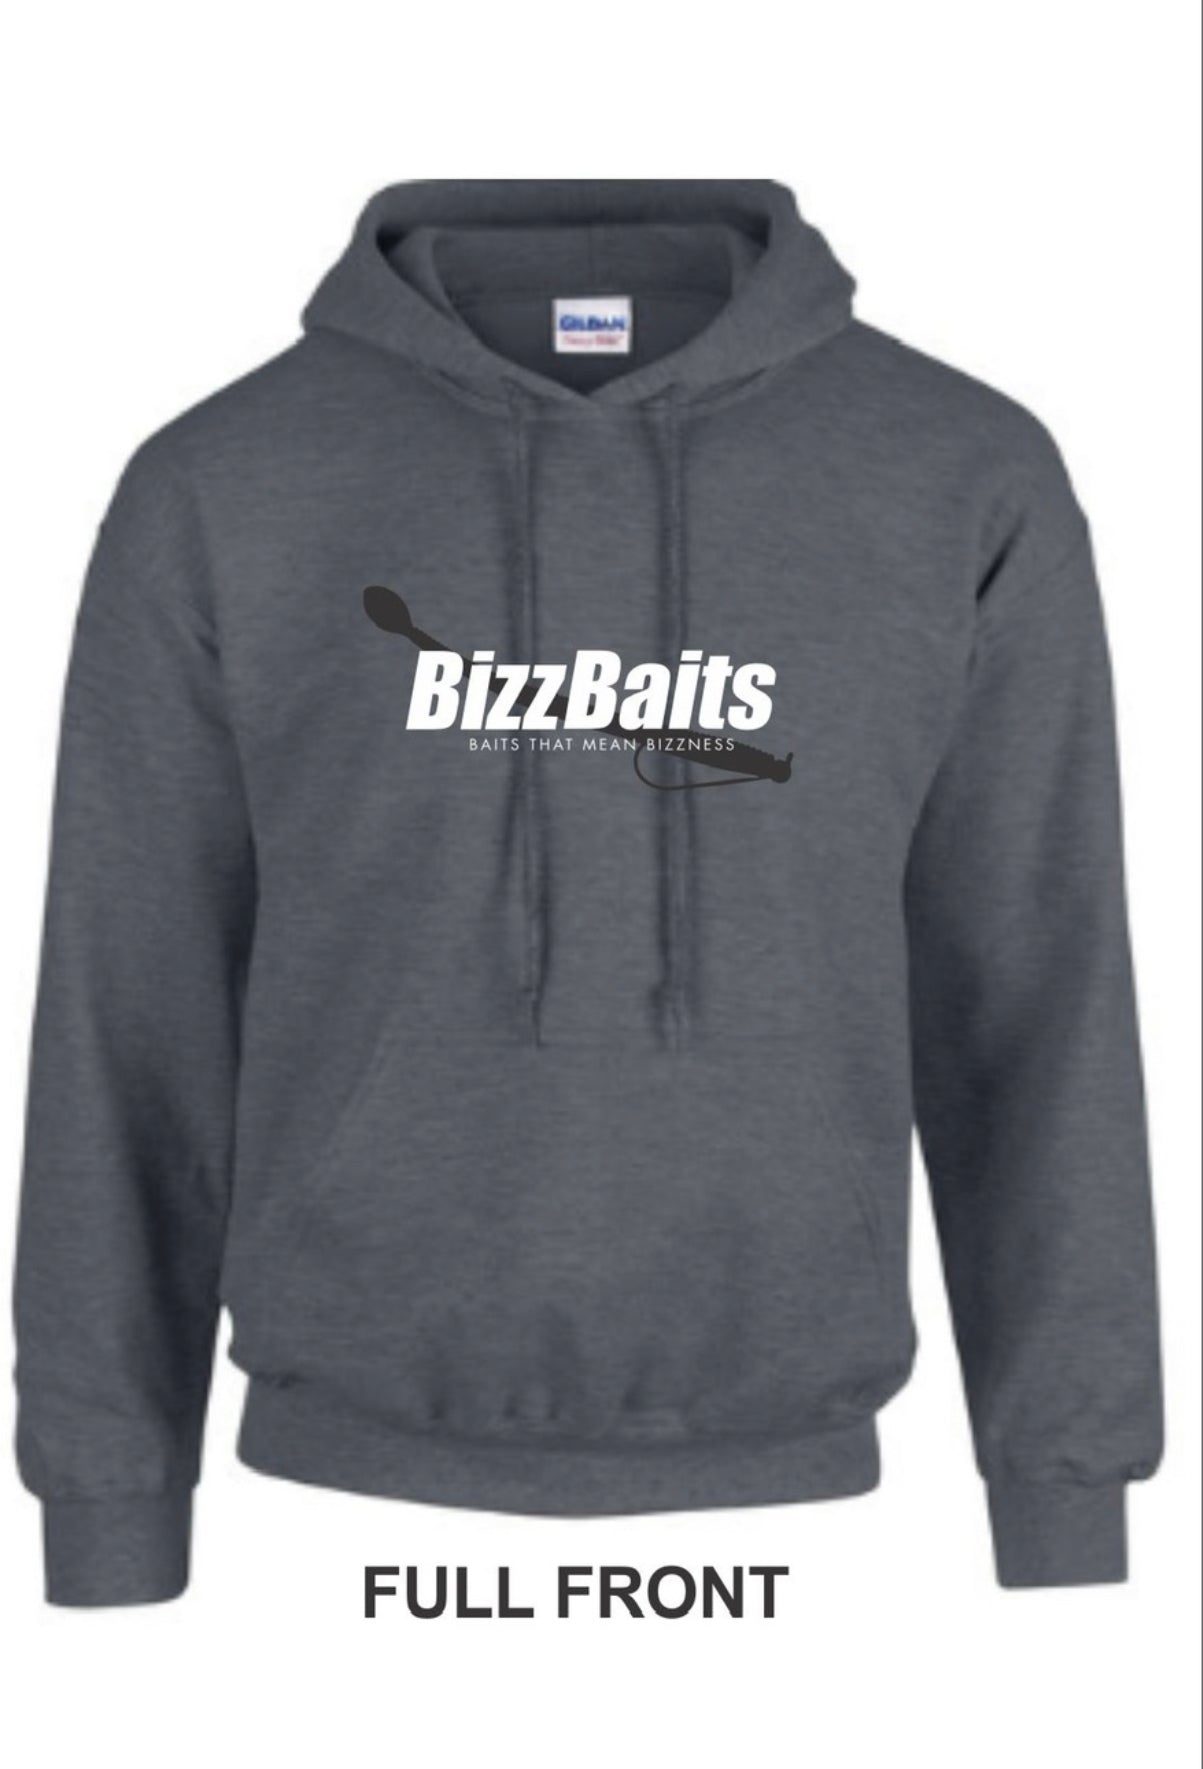 Shop Stylish and Durable Bizz Baits Apparel and Accessories for Fishing in  Concord, NC – BizzBaits